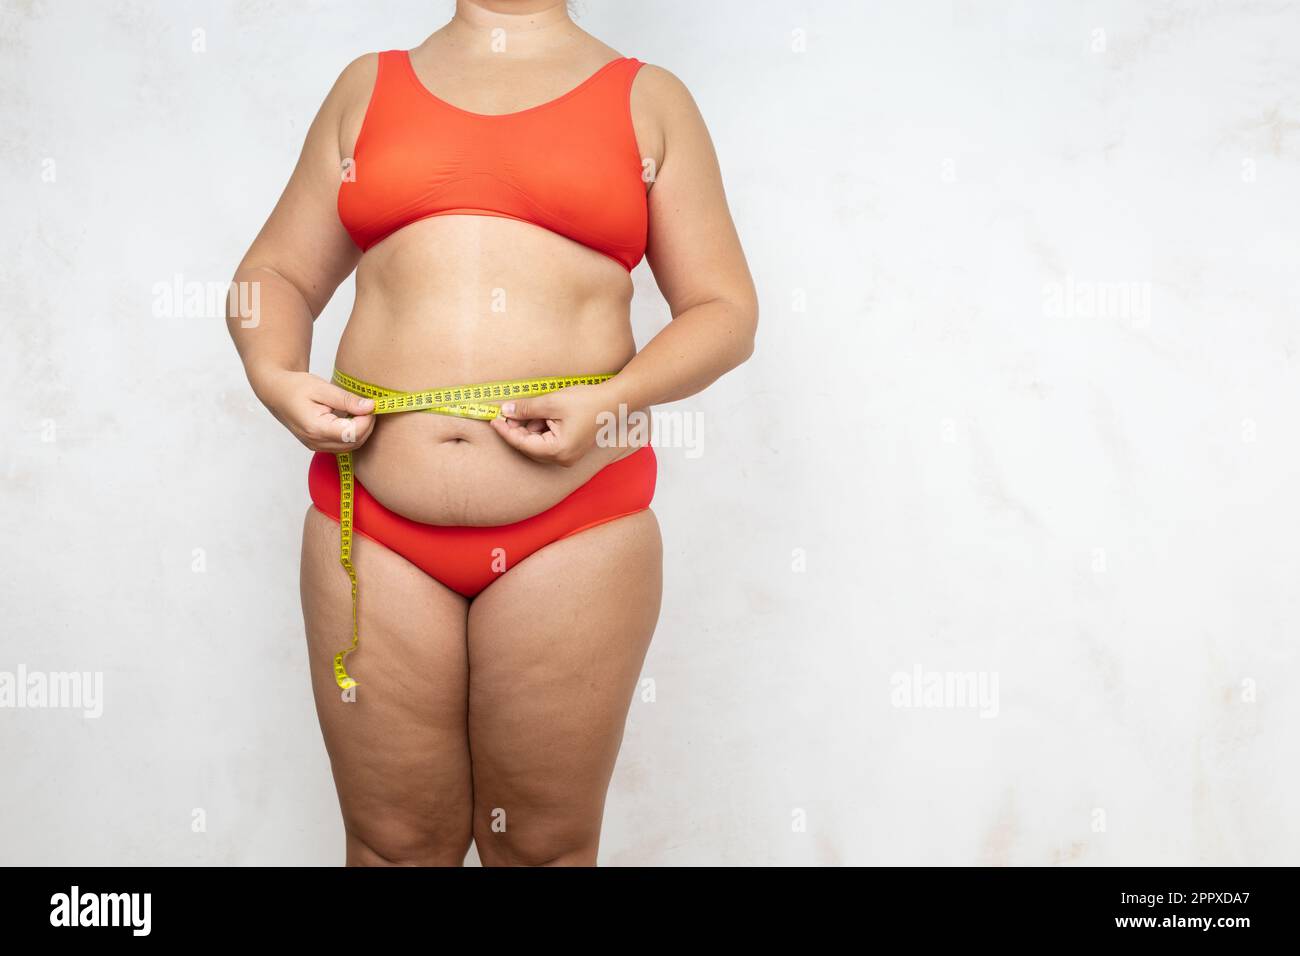 Overweight woman measure waist circumference with tape, white